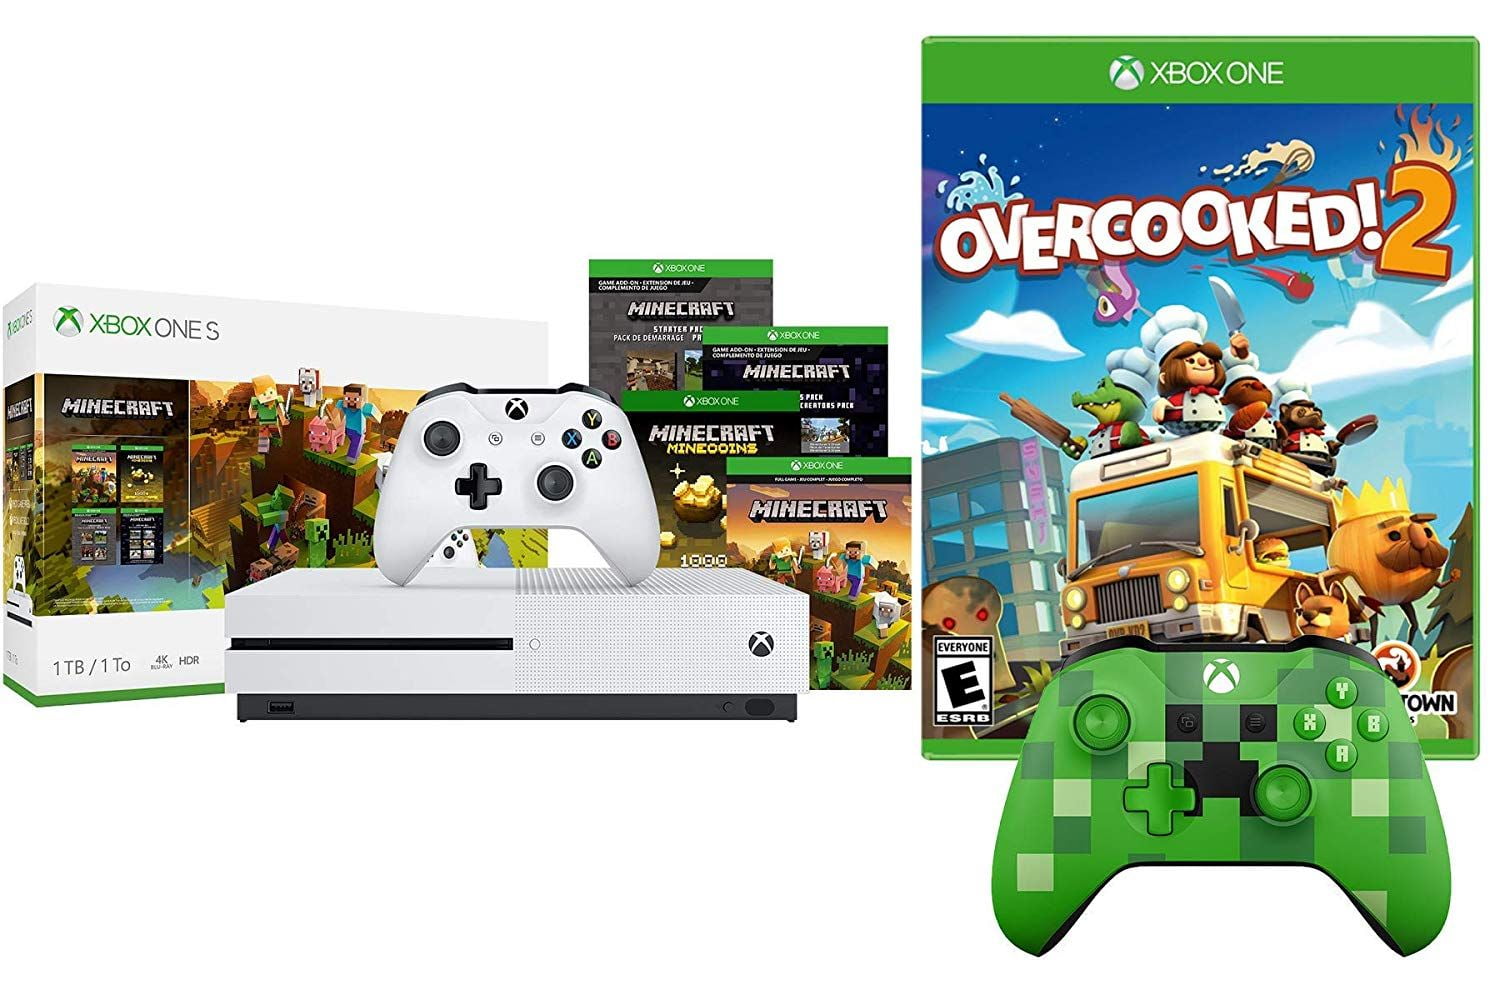 Xbox One S Minecraft And Overcooked 2 Bunlde Minecraft Starter Pack Creators Pack 1000 In Game Coin Overcooked 2 And Xbox One S 1tb Console With Extra Limited Edition Mc Creeper Controller